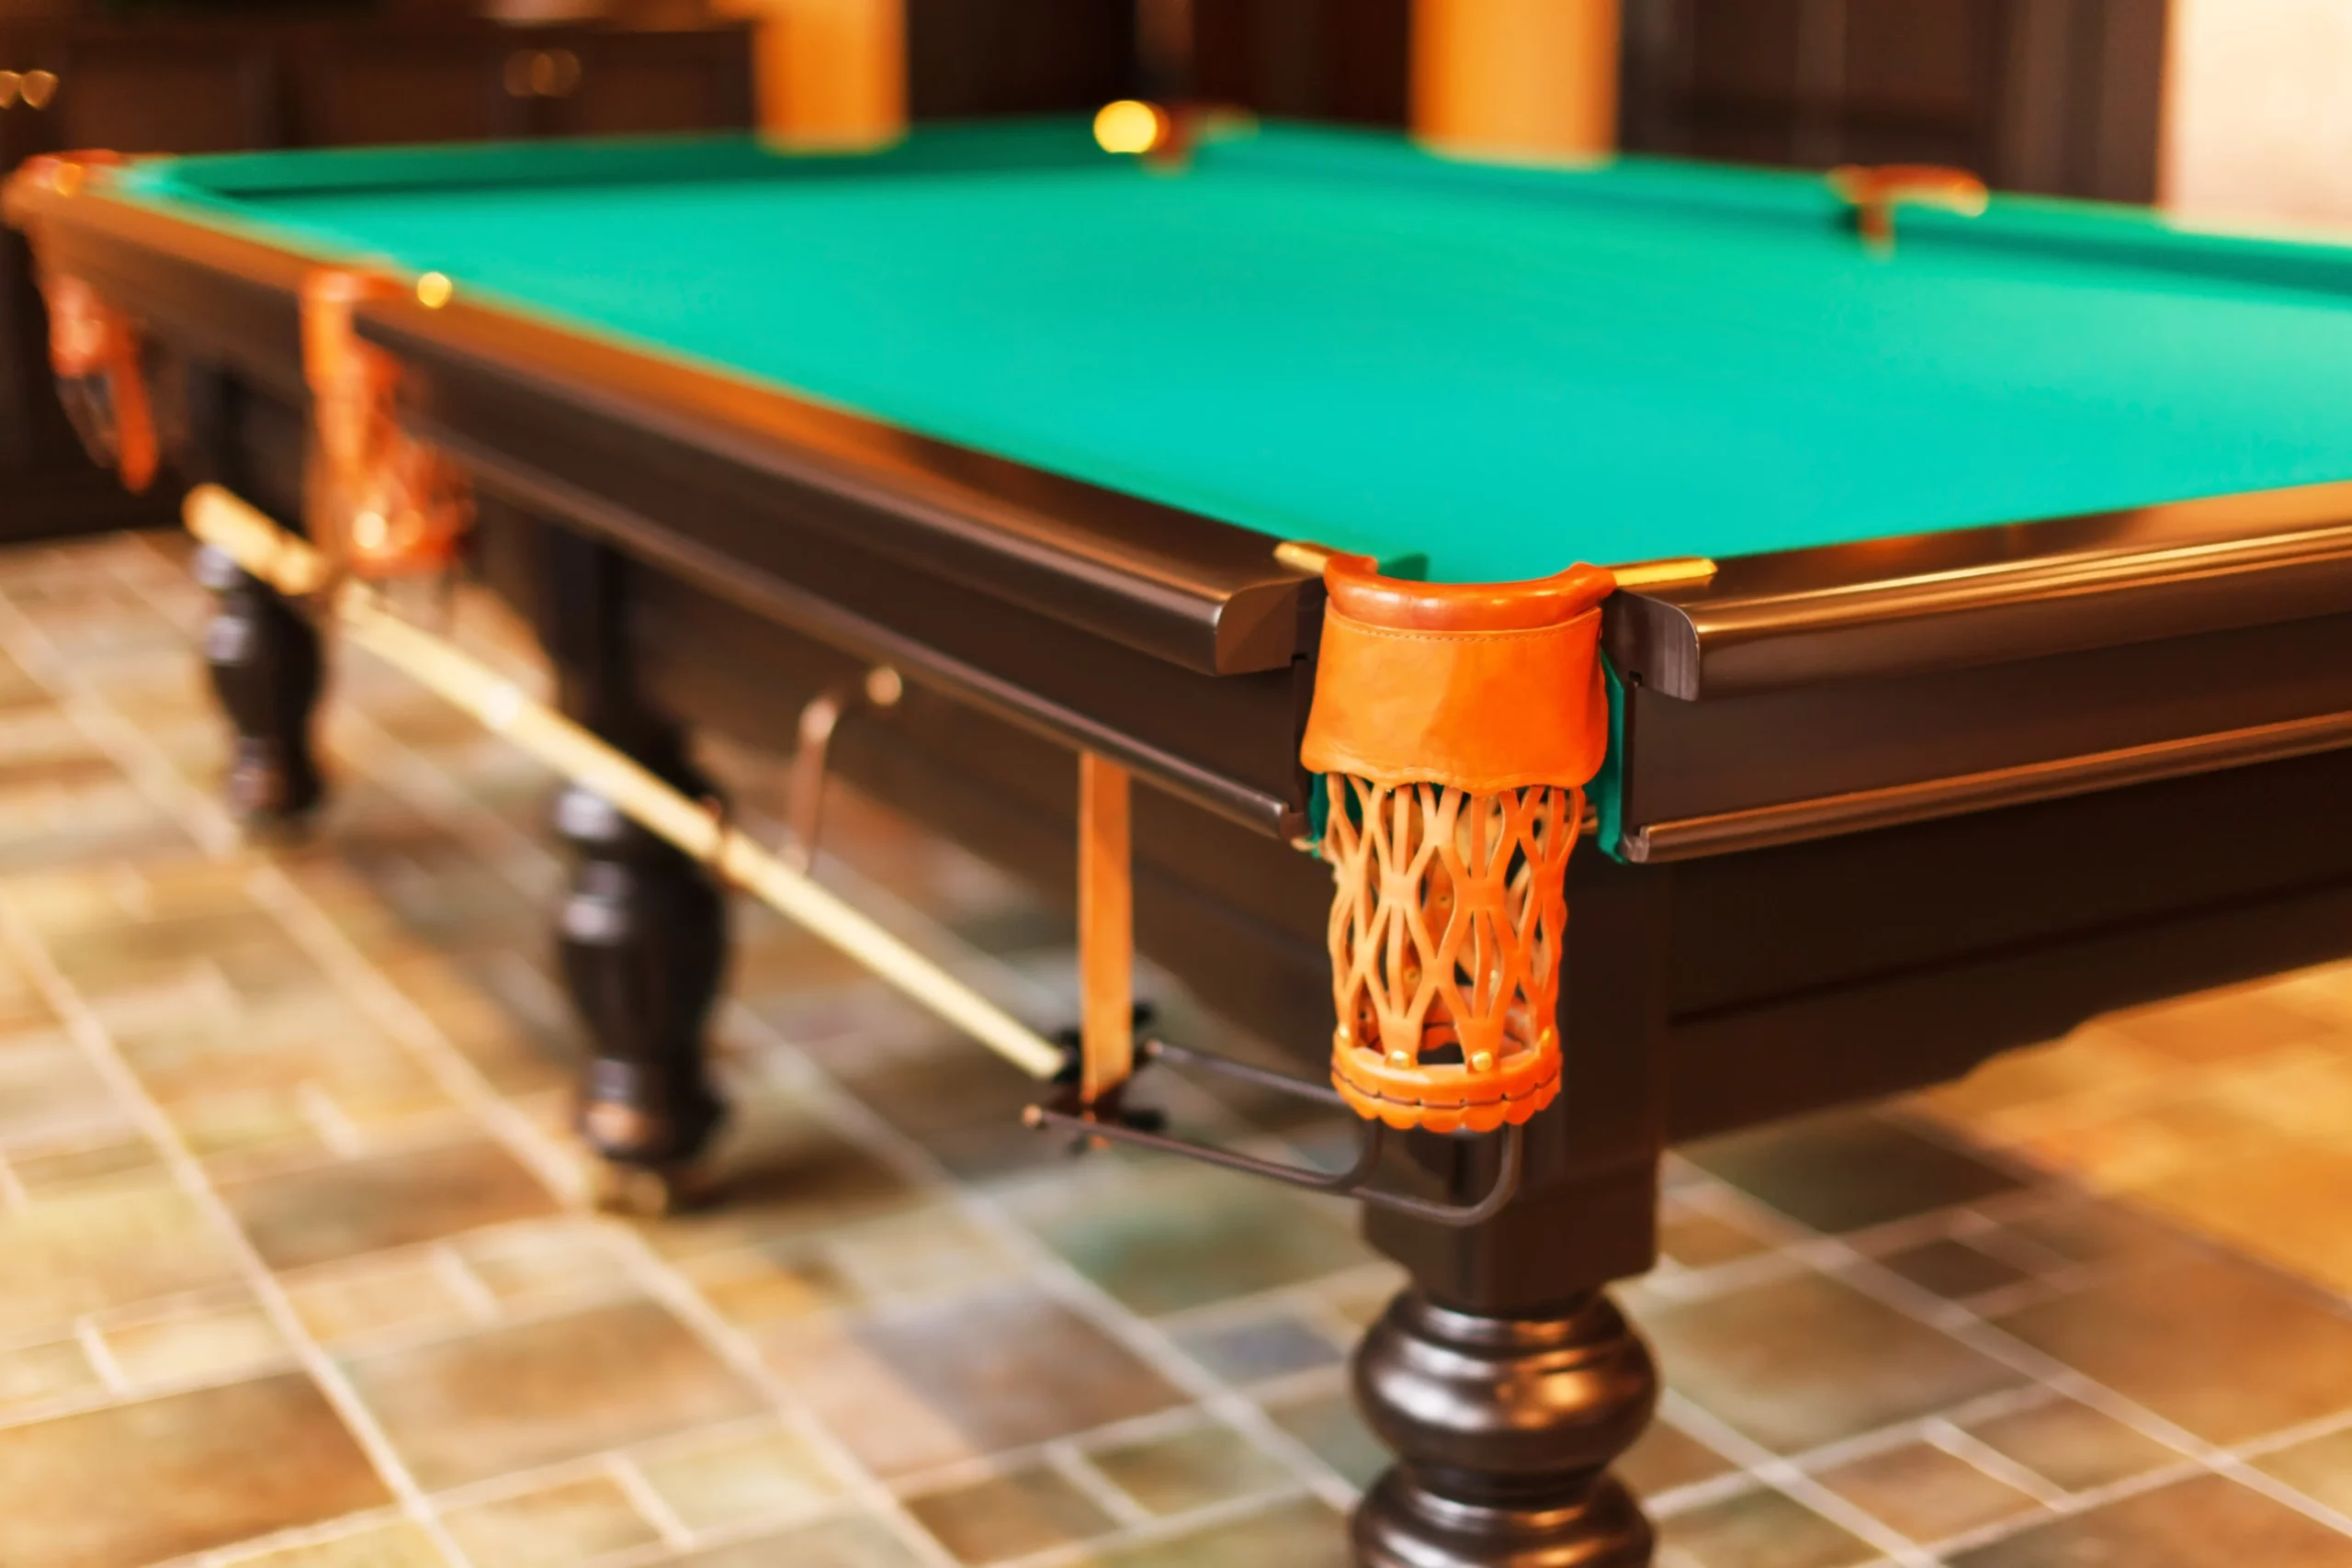 Why do Billiards Tables Not Have Pockets?